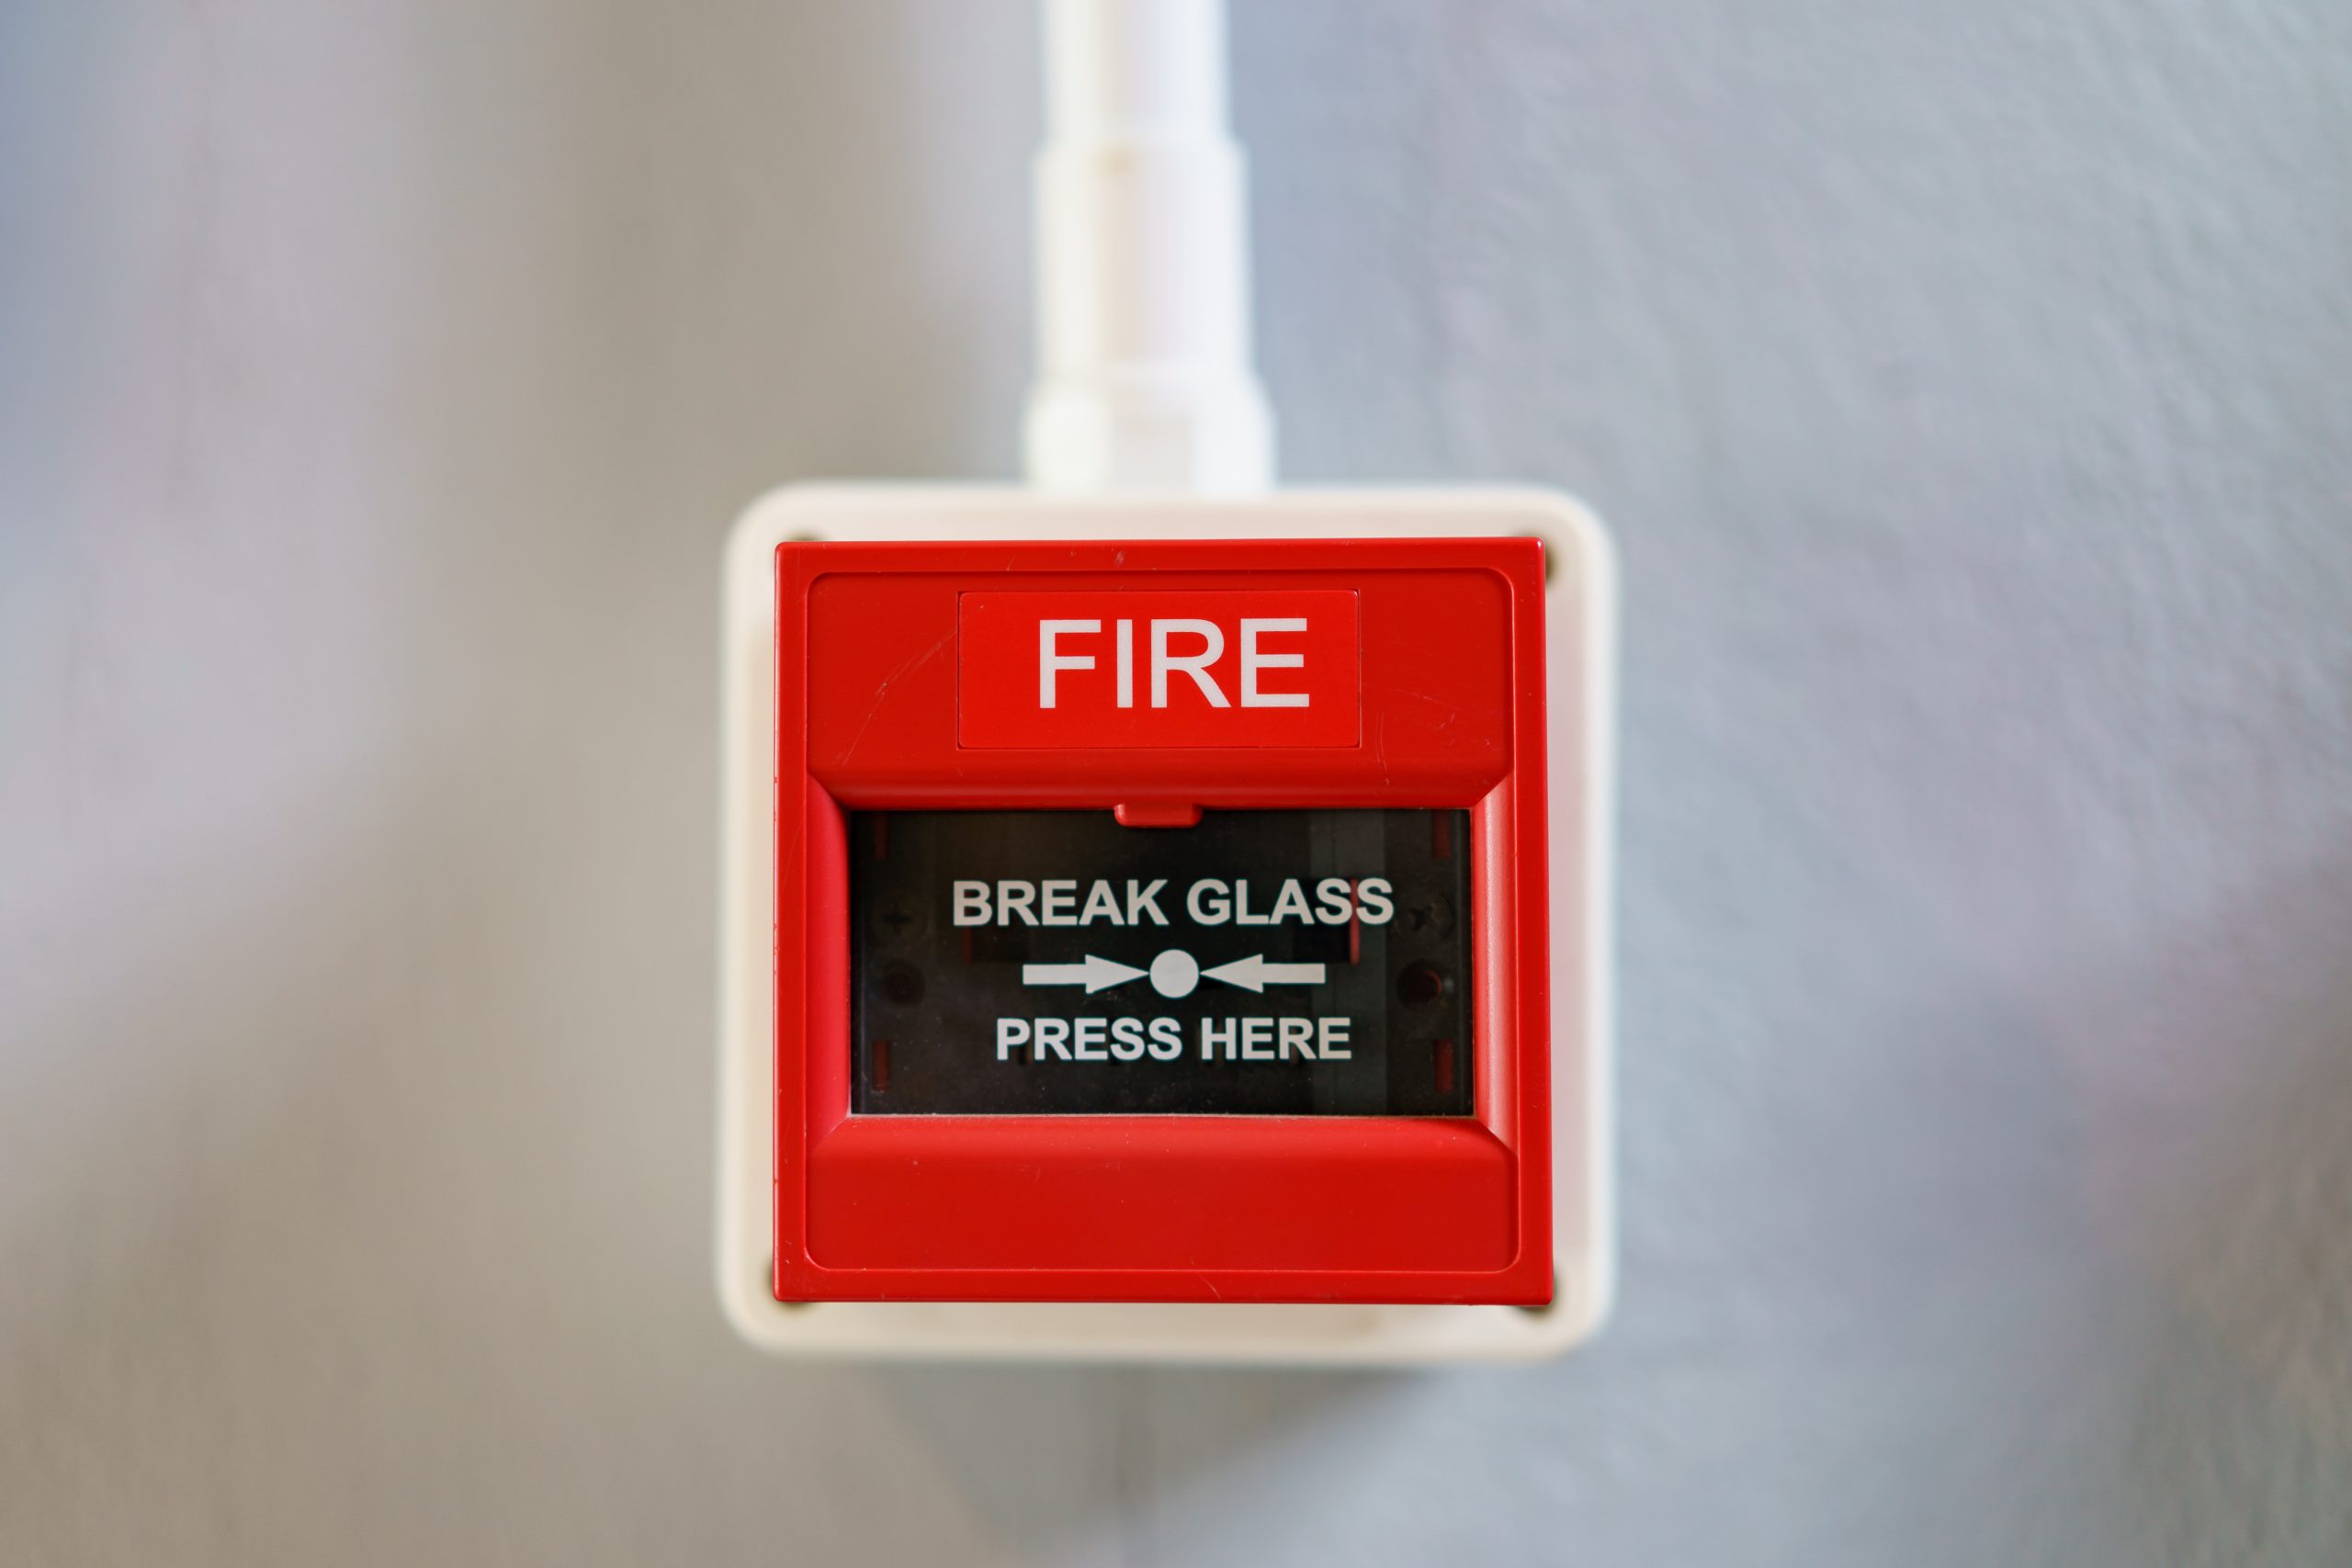 PRACTICAL TRAINING ON BASIC ELECTRICITY/ FIRE ALARM SYSTEM